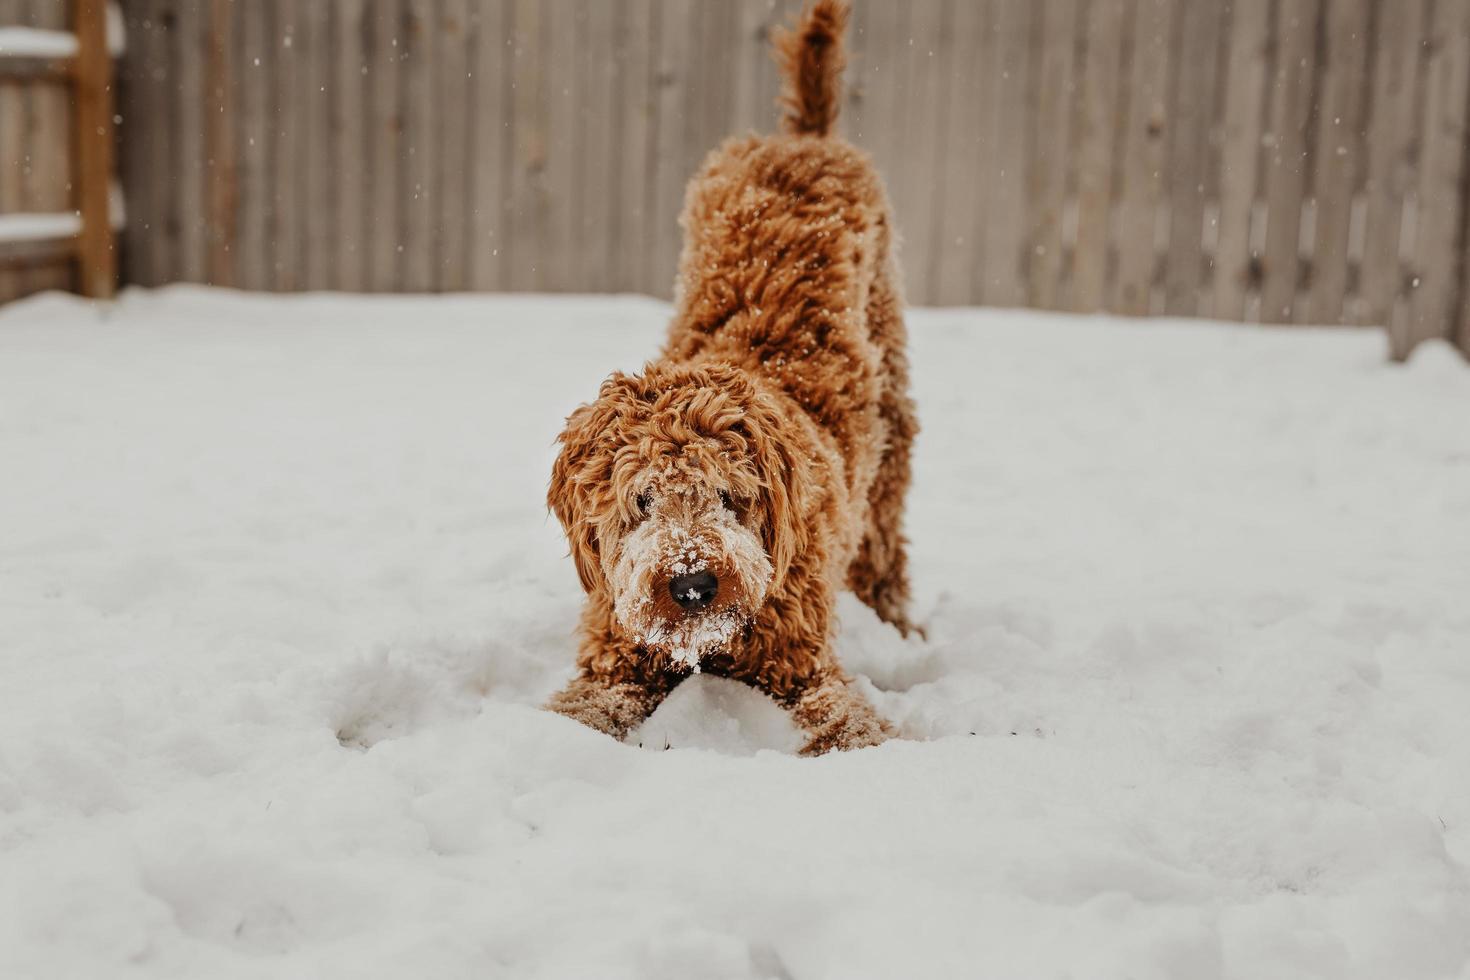 A Golden doodle dog playing in the snow photo